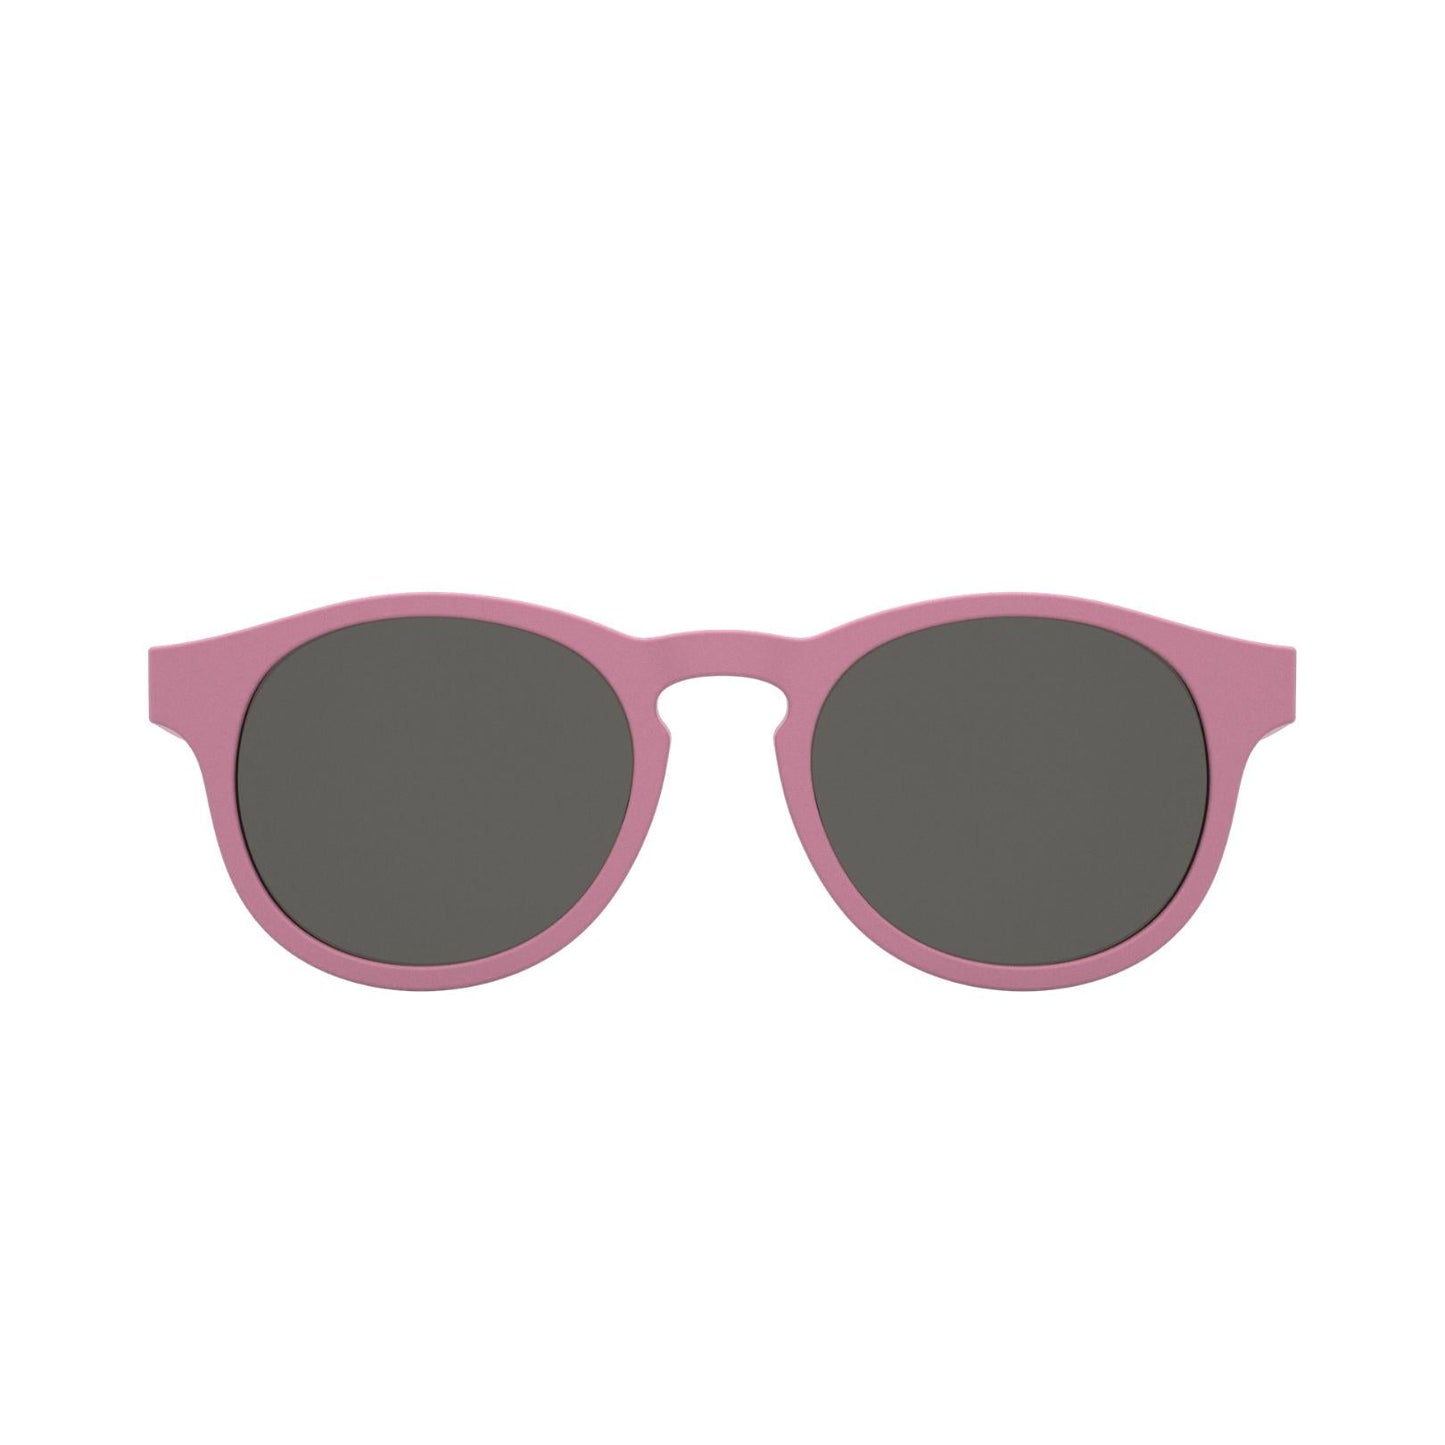 Limited Edition Keyhole: Pretty in Pink Sunglasses